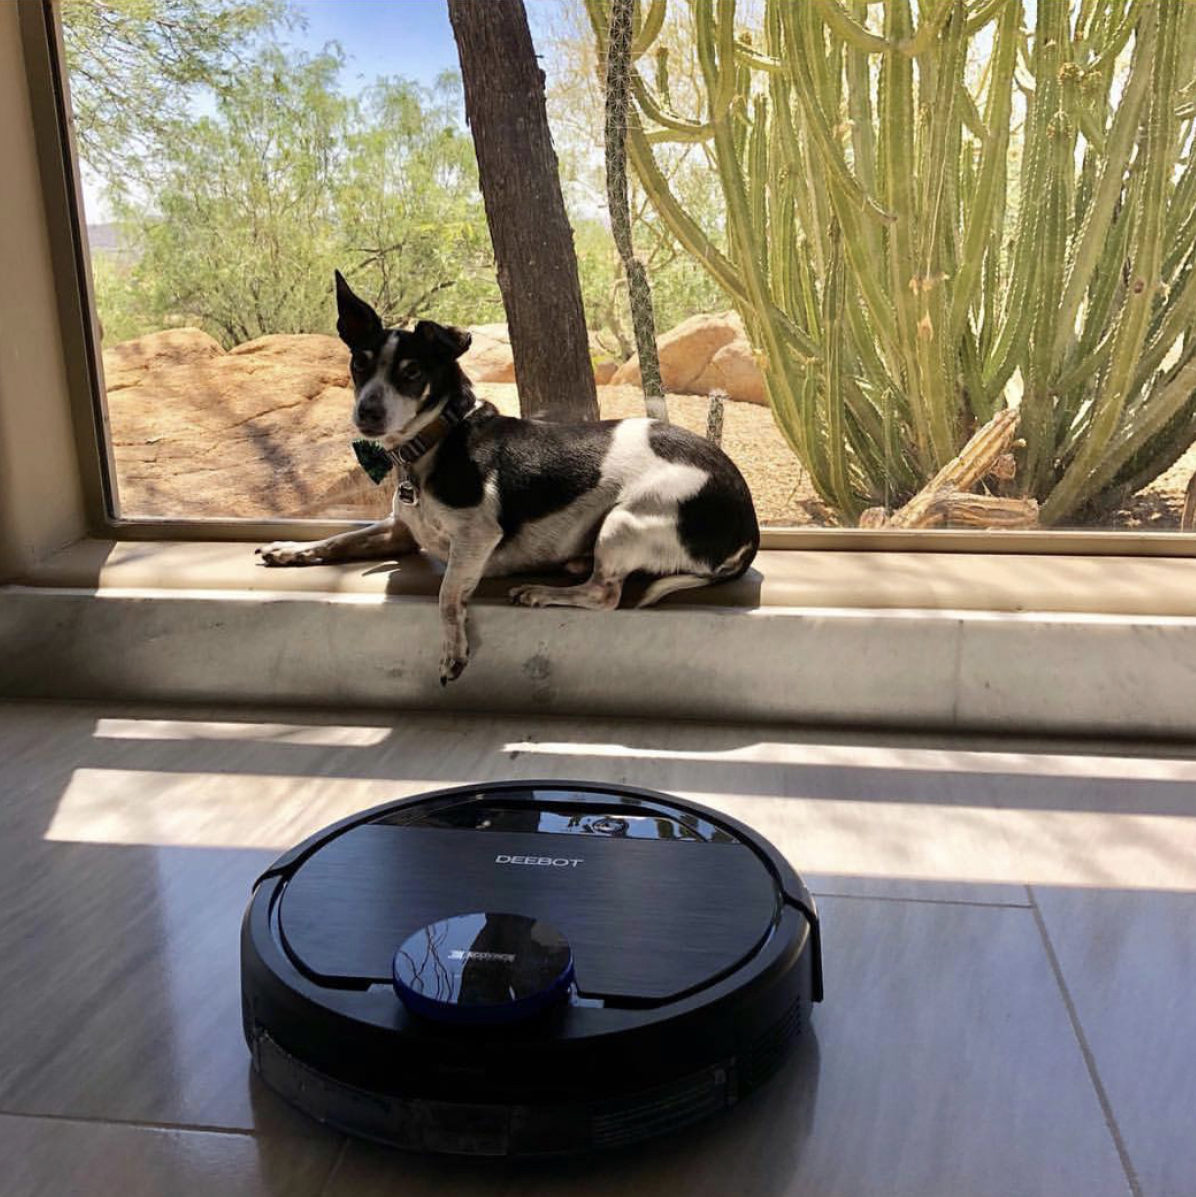 Robot vacuum around a domestic dog, sitting in the windowsill of a house